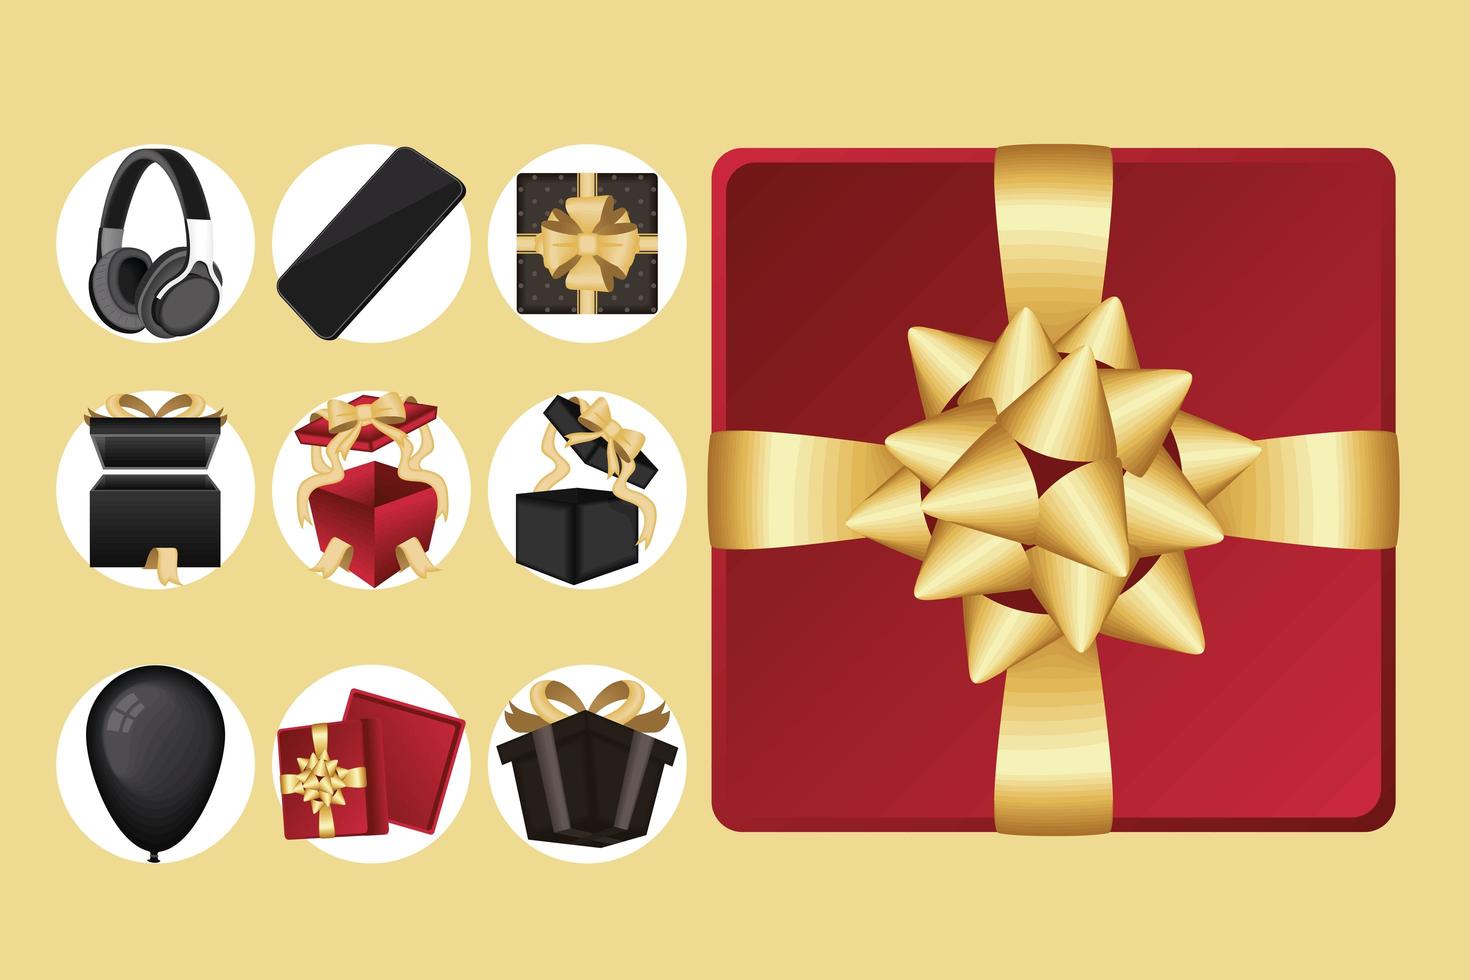 seven gifts and icons vector